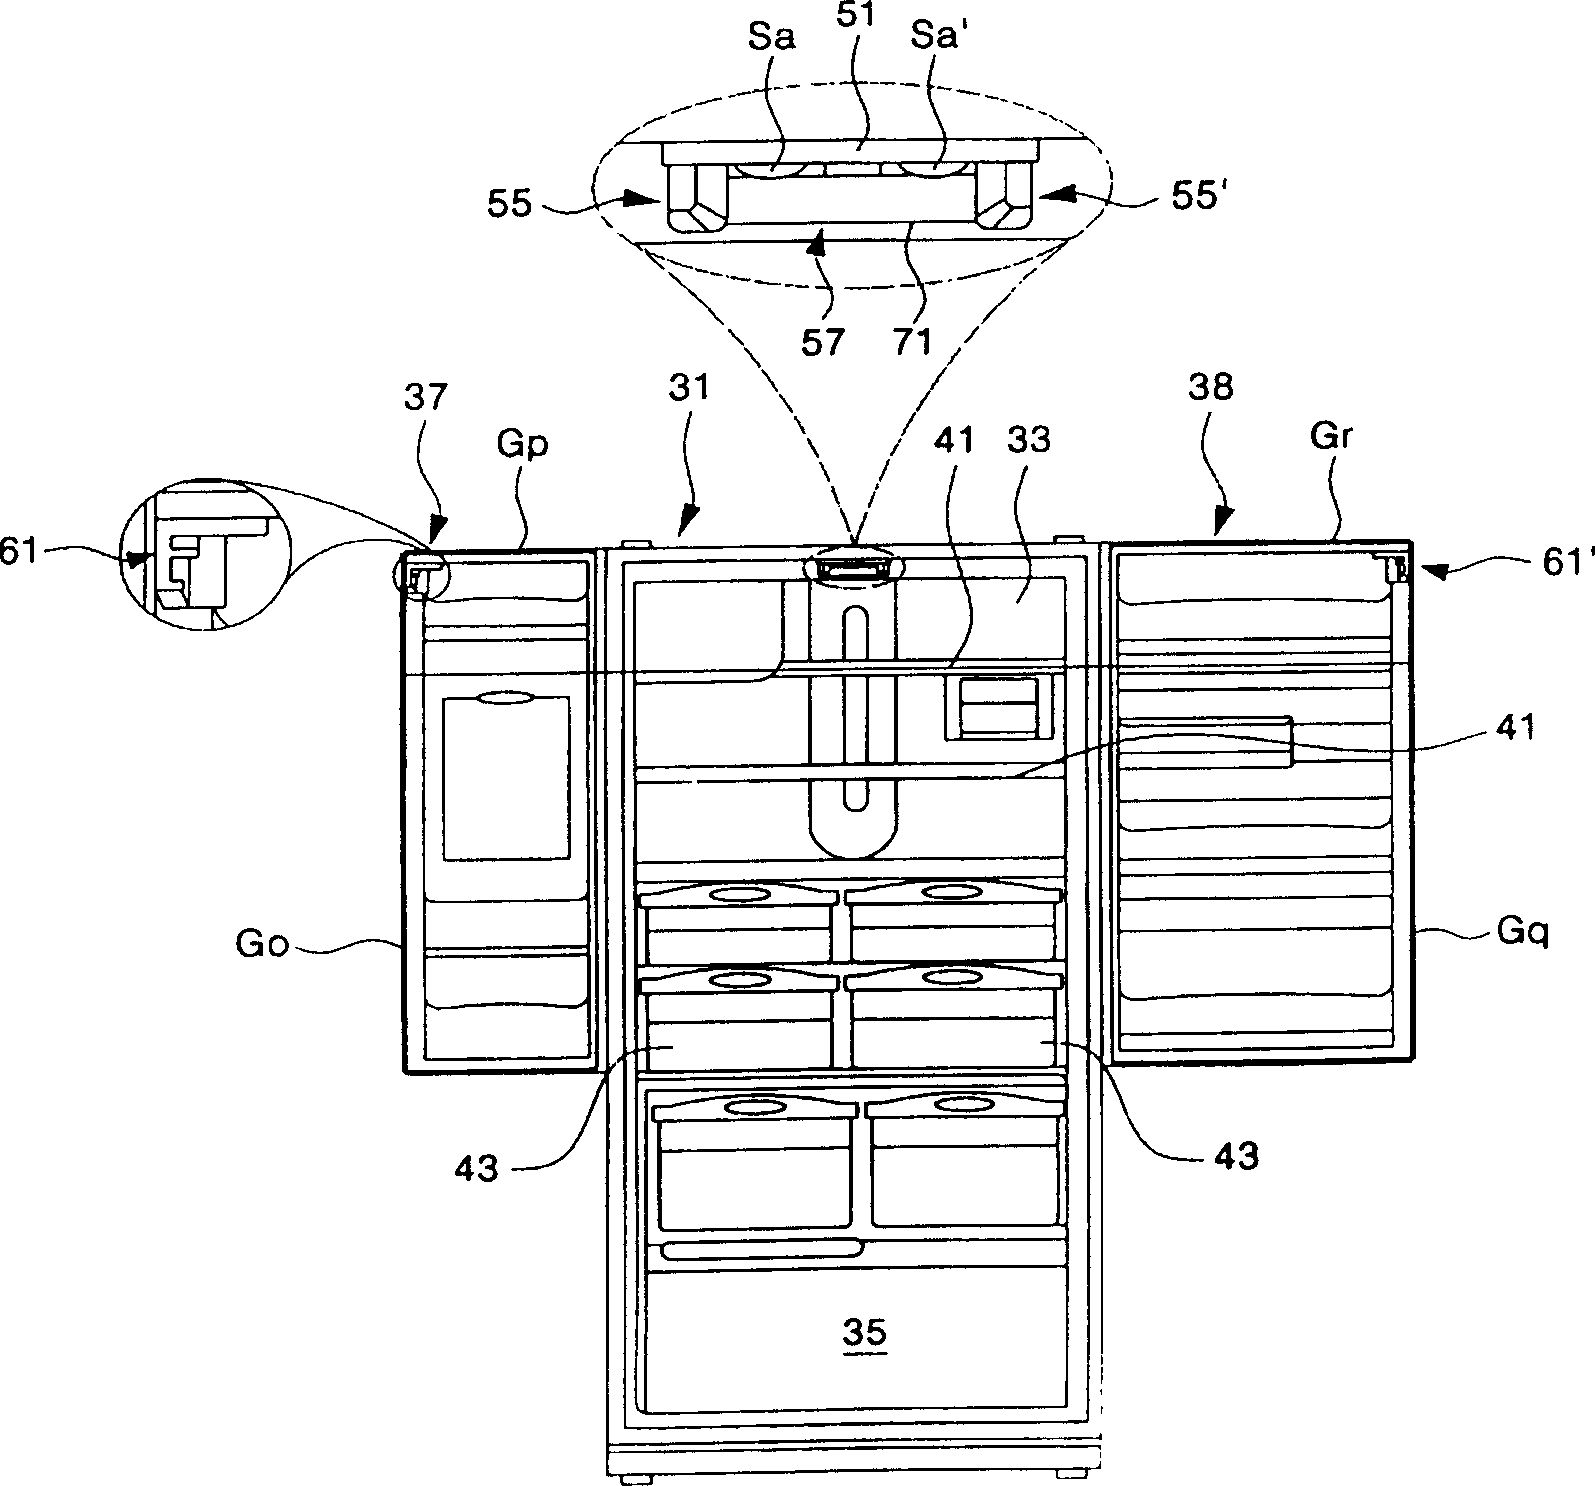 Opening door prevention device for refrigerator